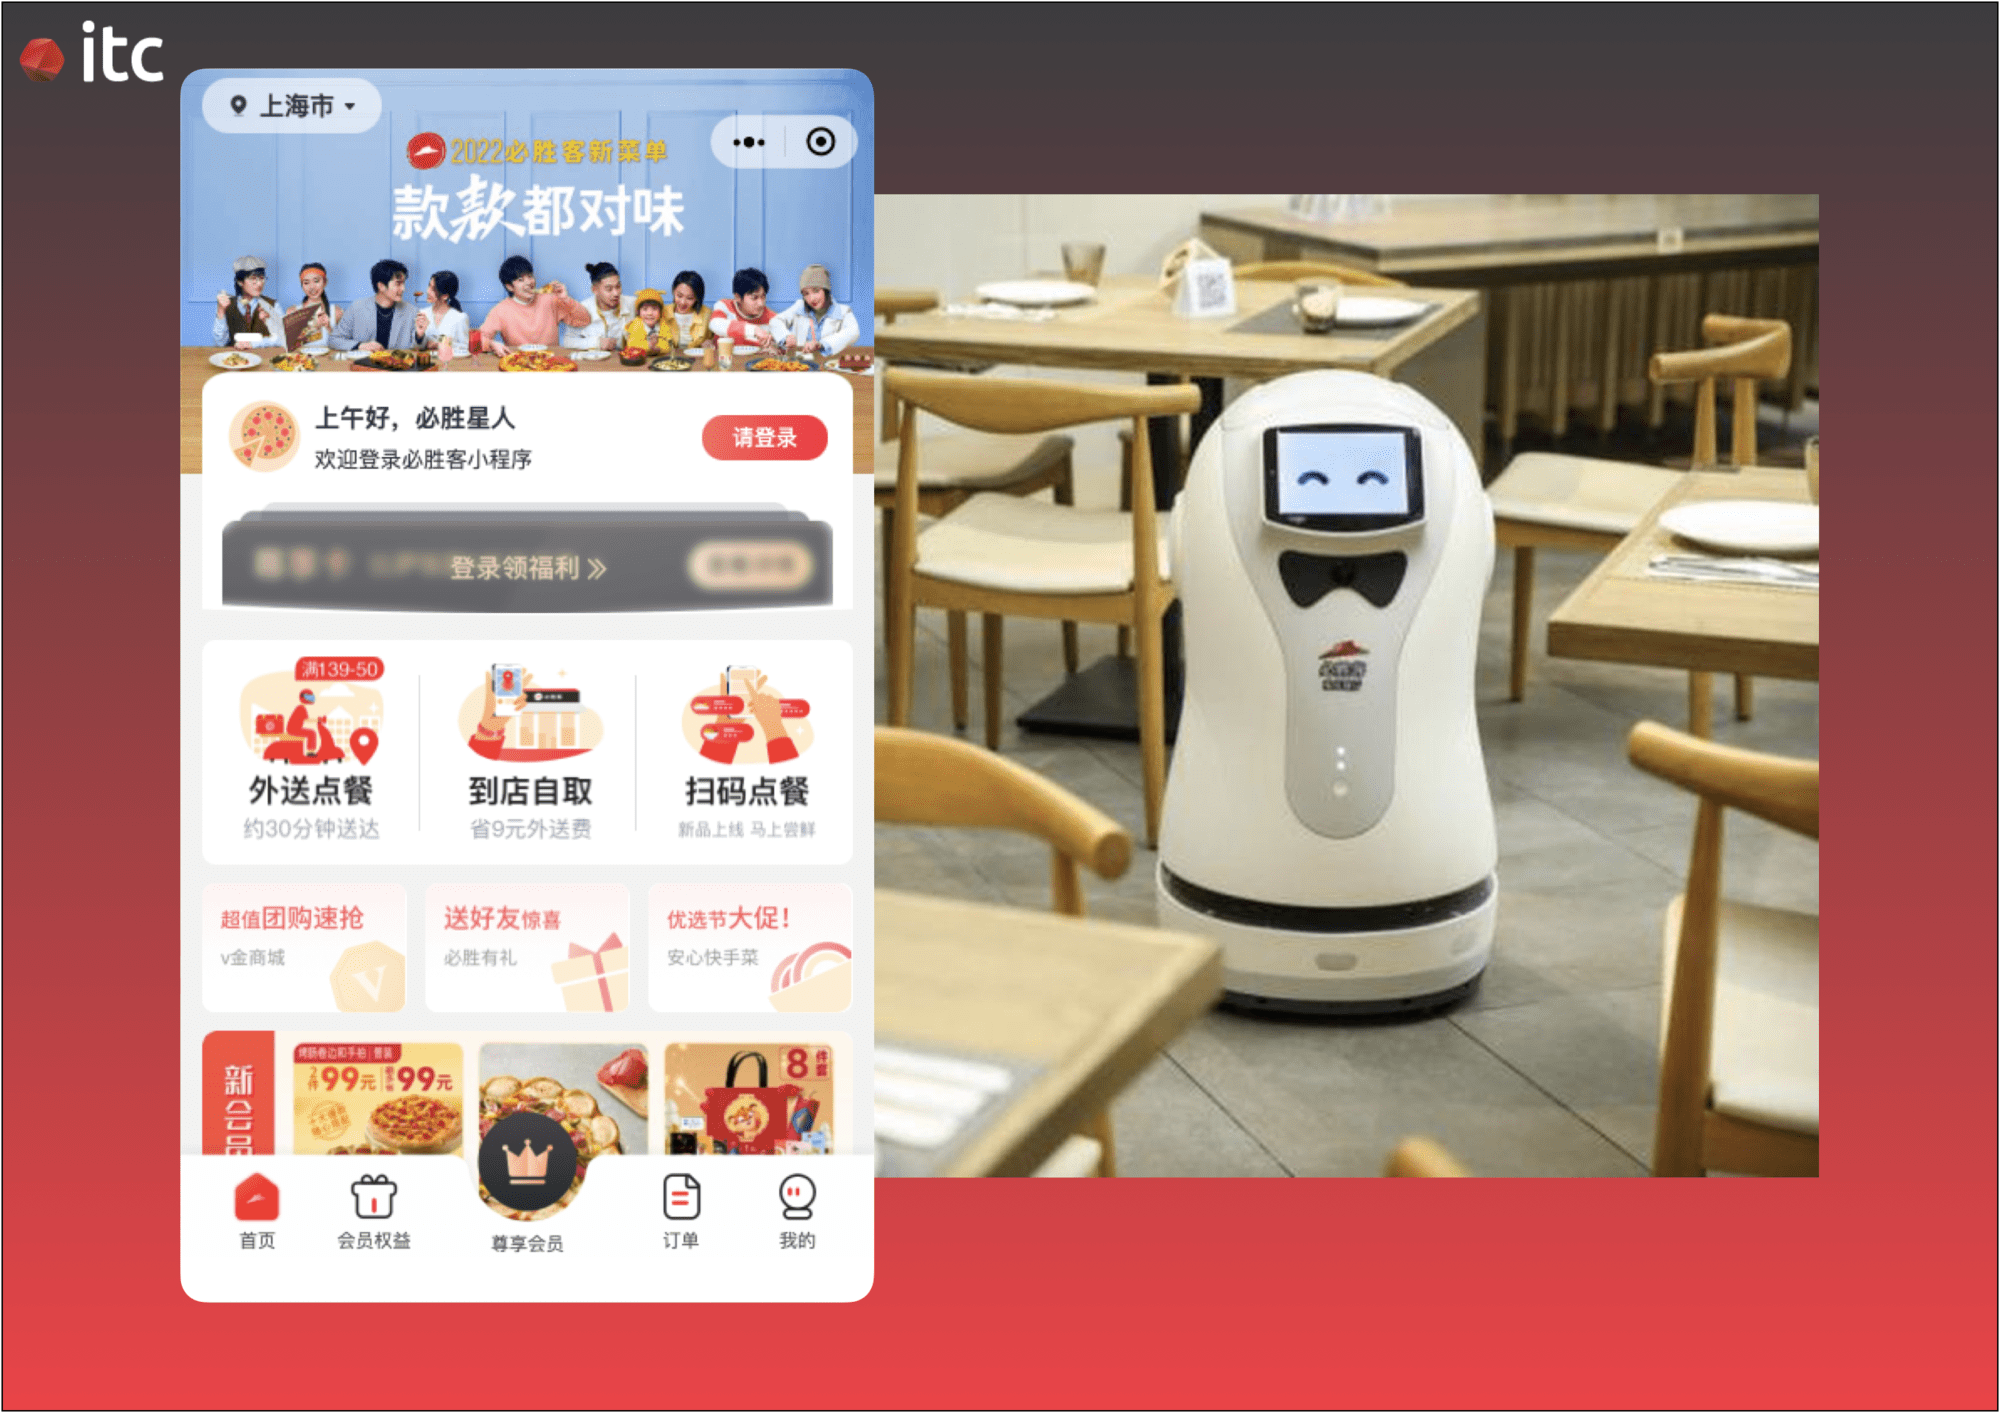 At the Smart Pizza Hut - PH+, customers are served by robots and use the WeChat Mini Program to order